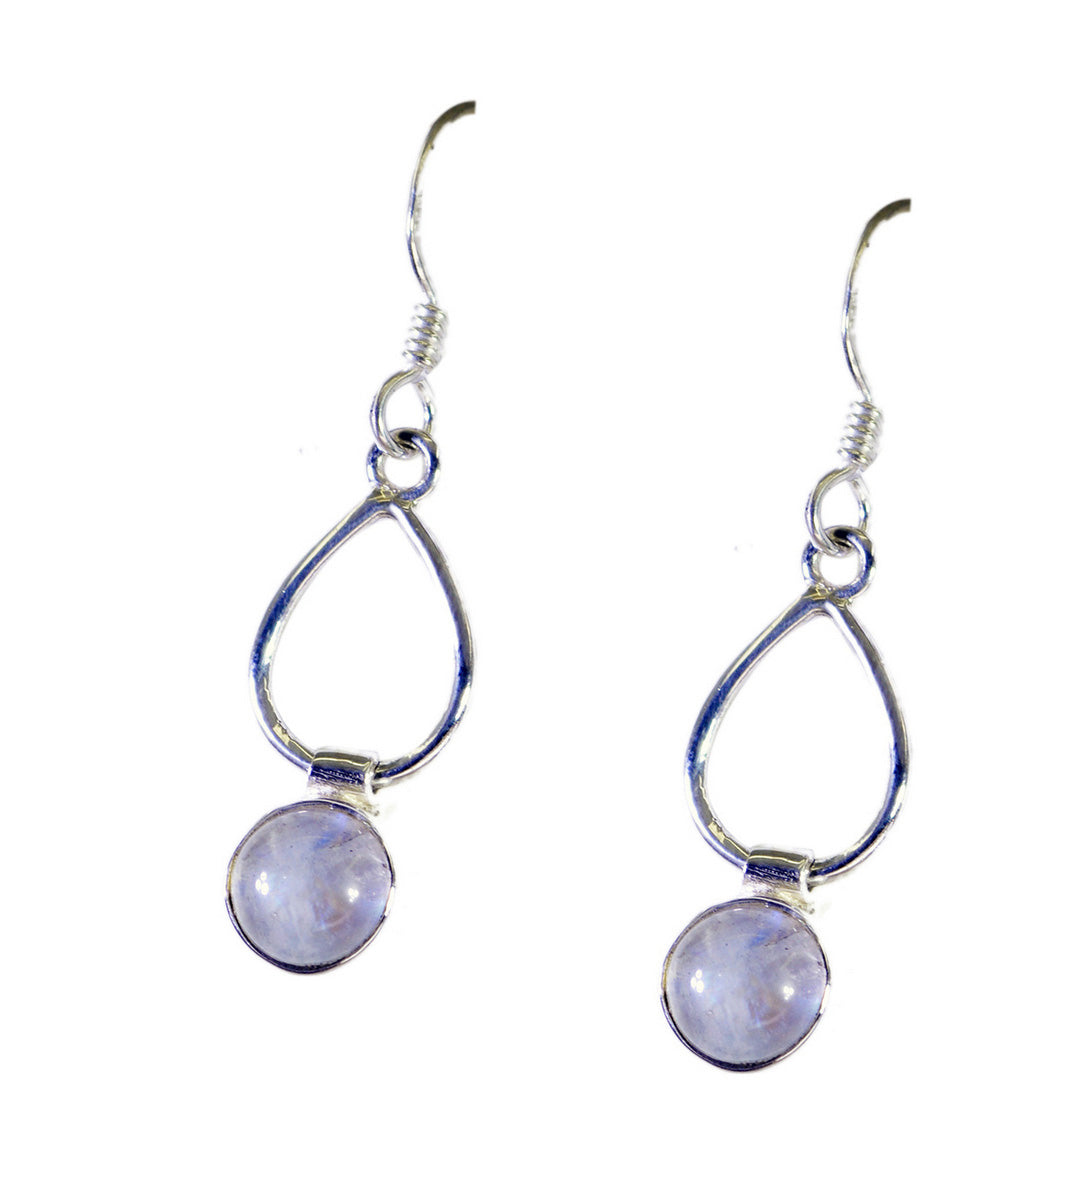 Riyo Natural Gemstone round Cabochon White Rainbow Moonstone Silver Earring gift for sister